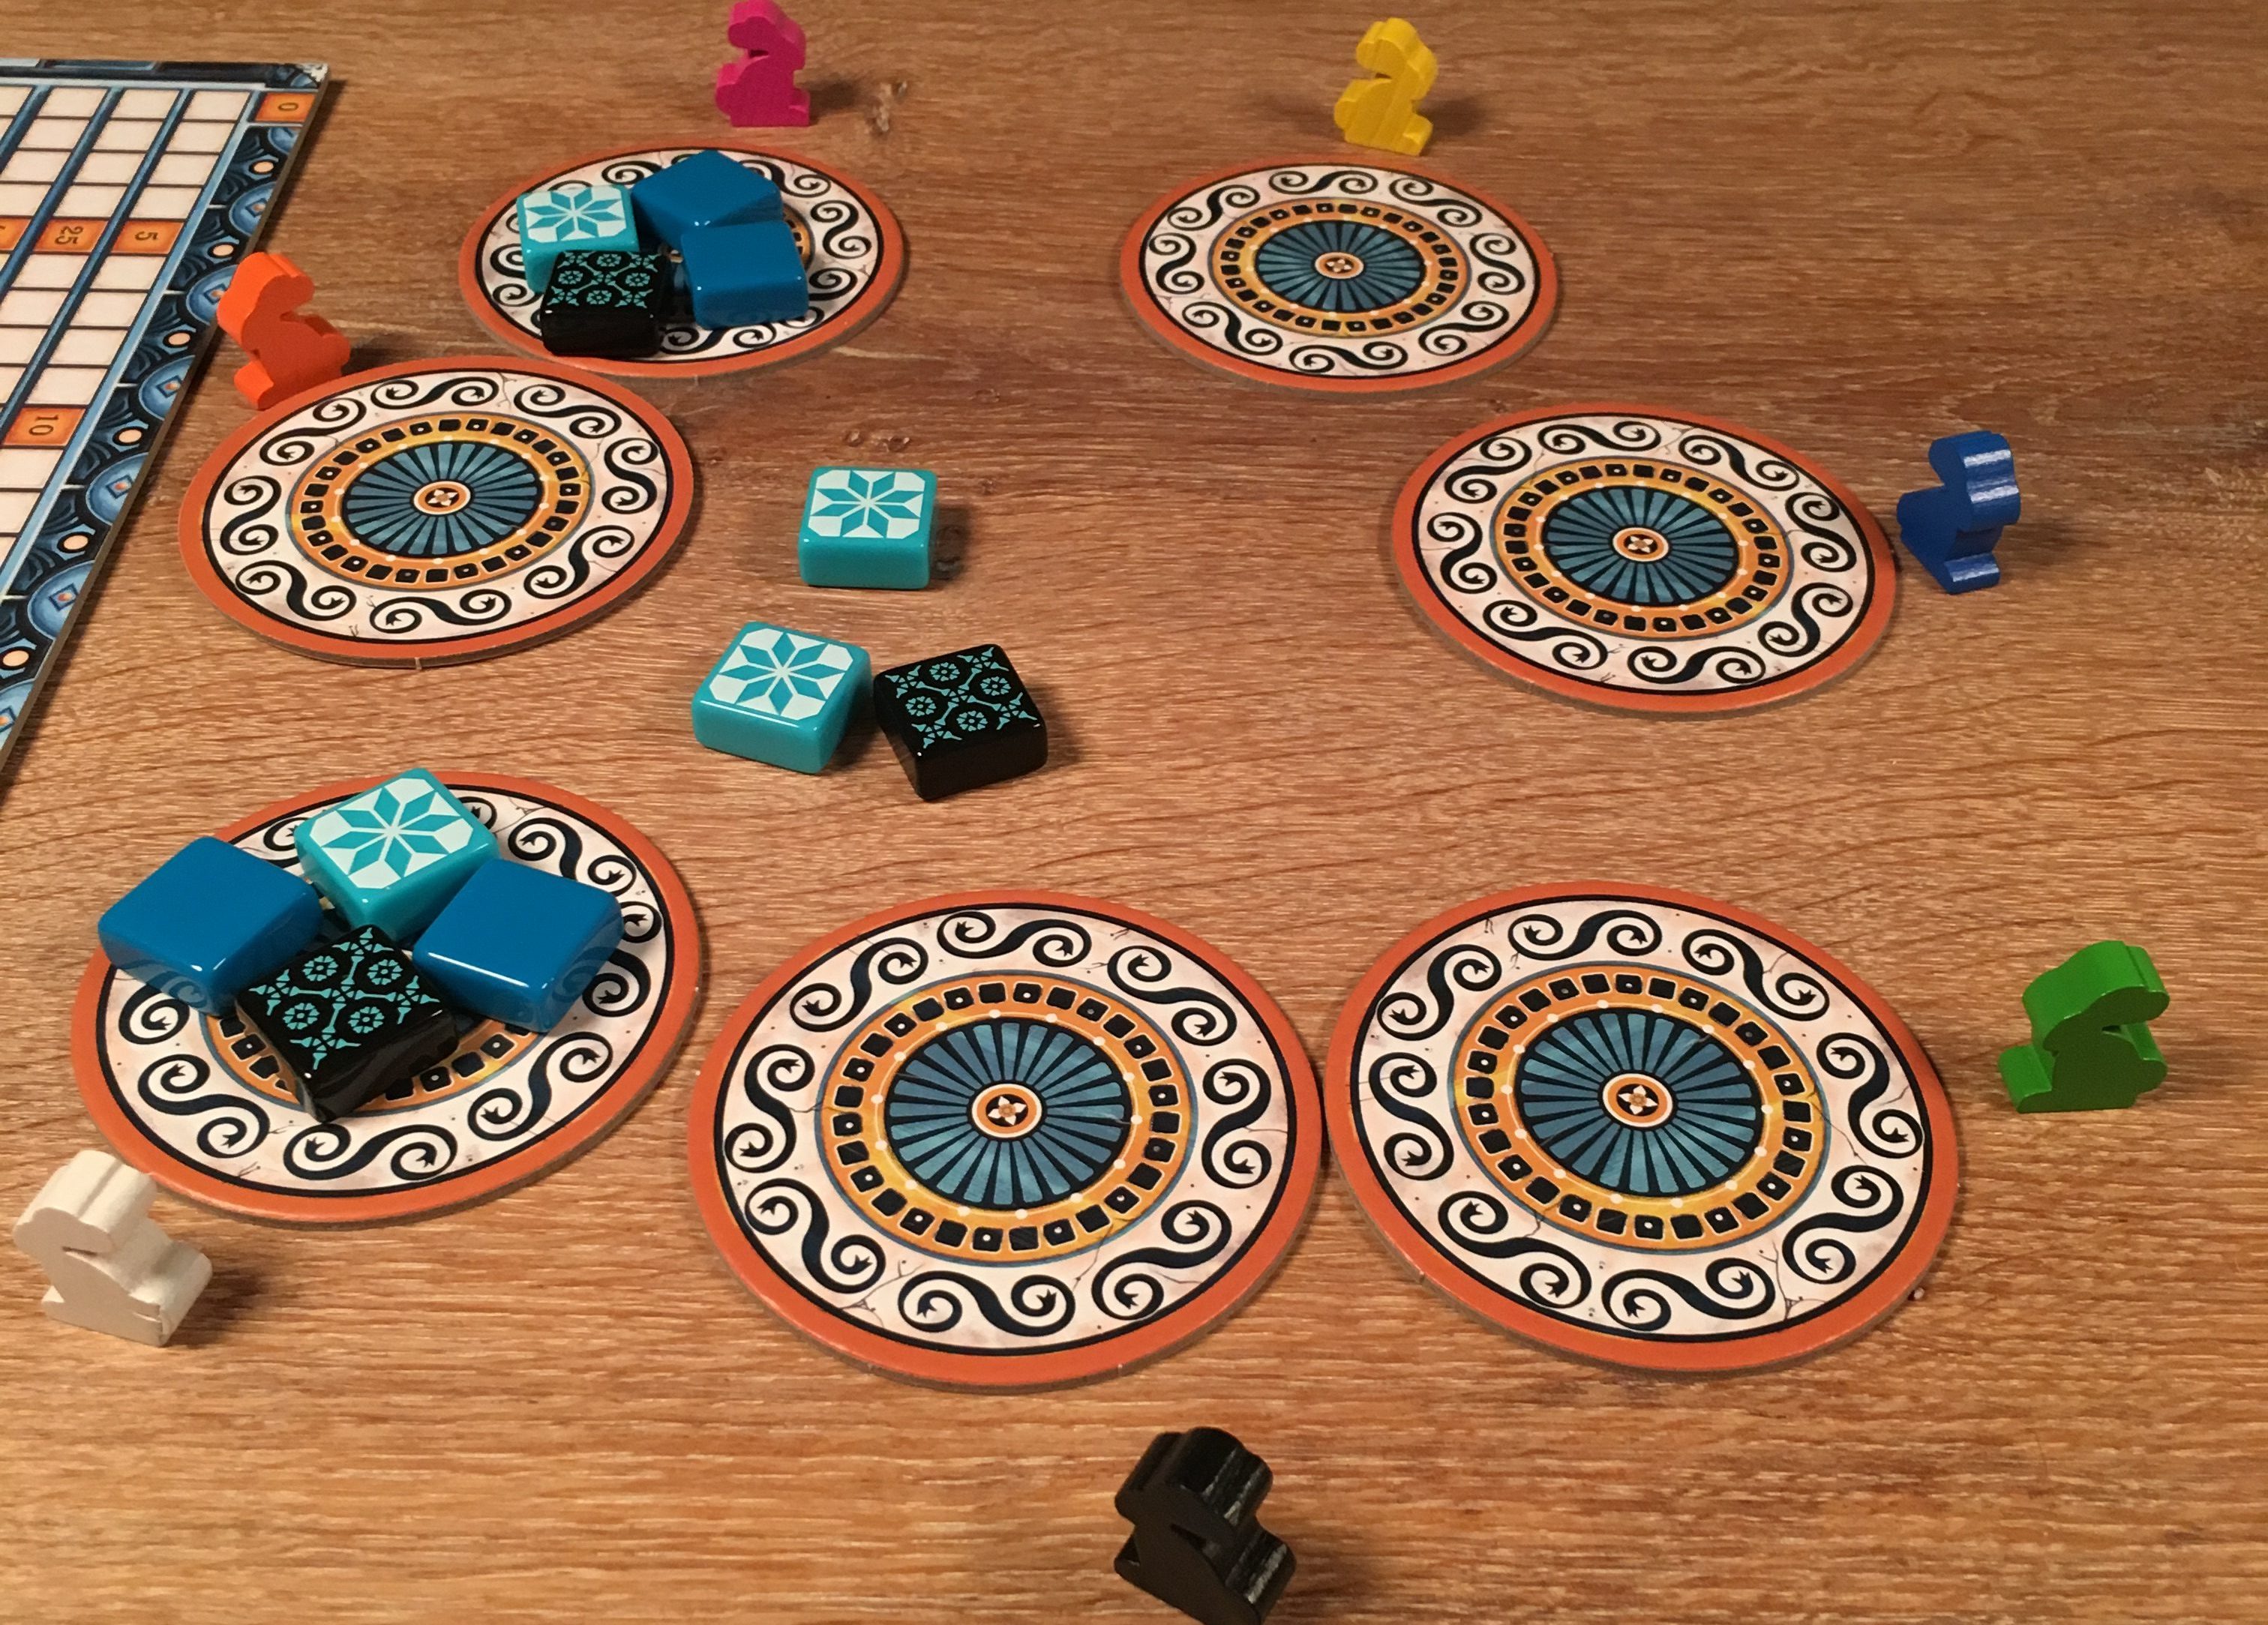 Skype setup with Dixit Meeples